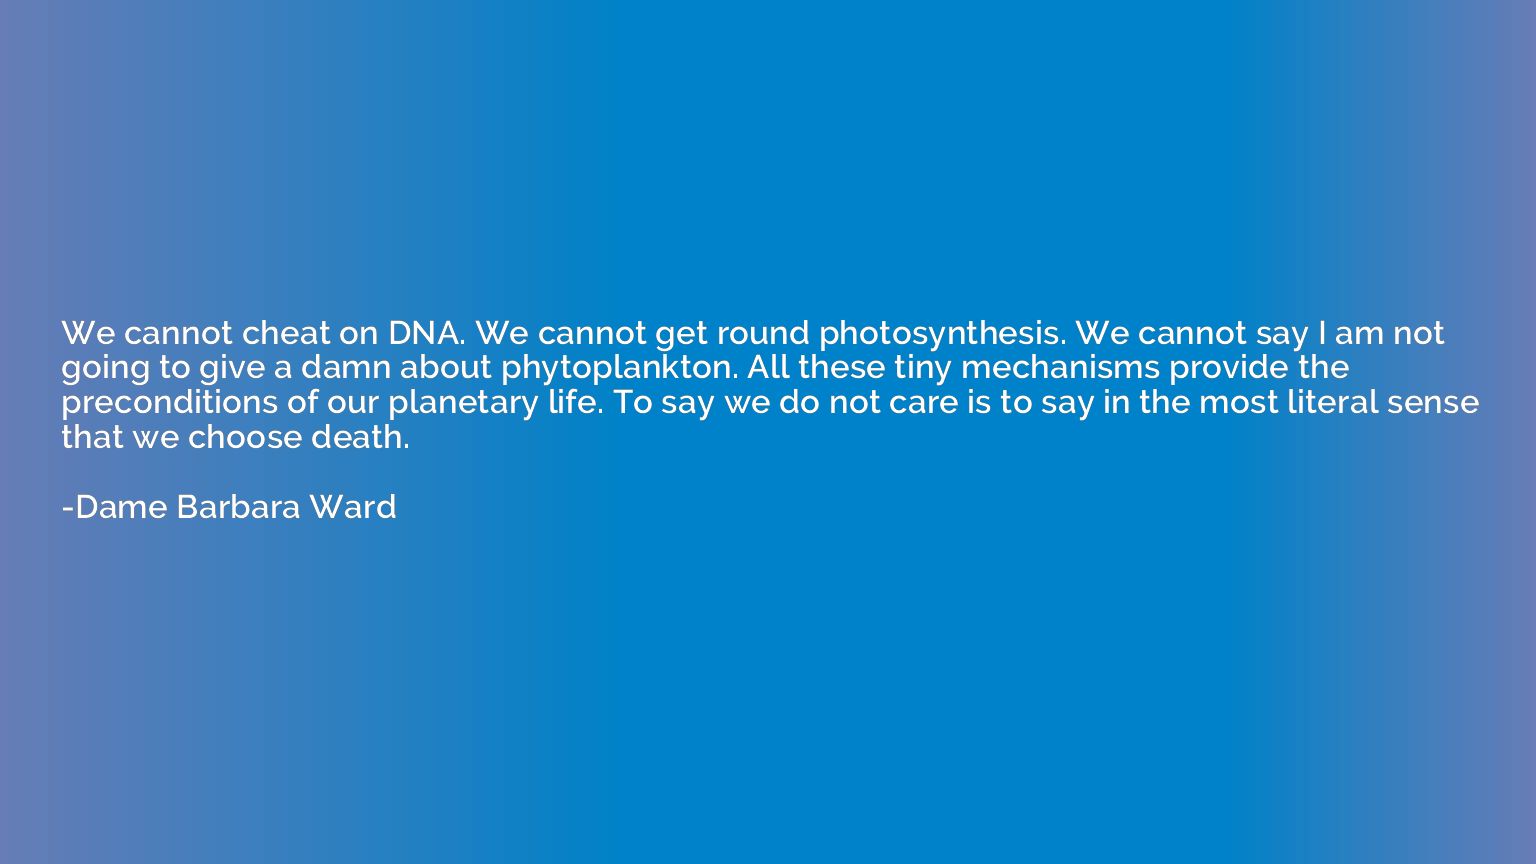 We cannot cheat on DNA. We cannot get round photosynthesis. 